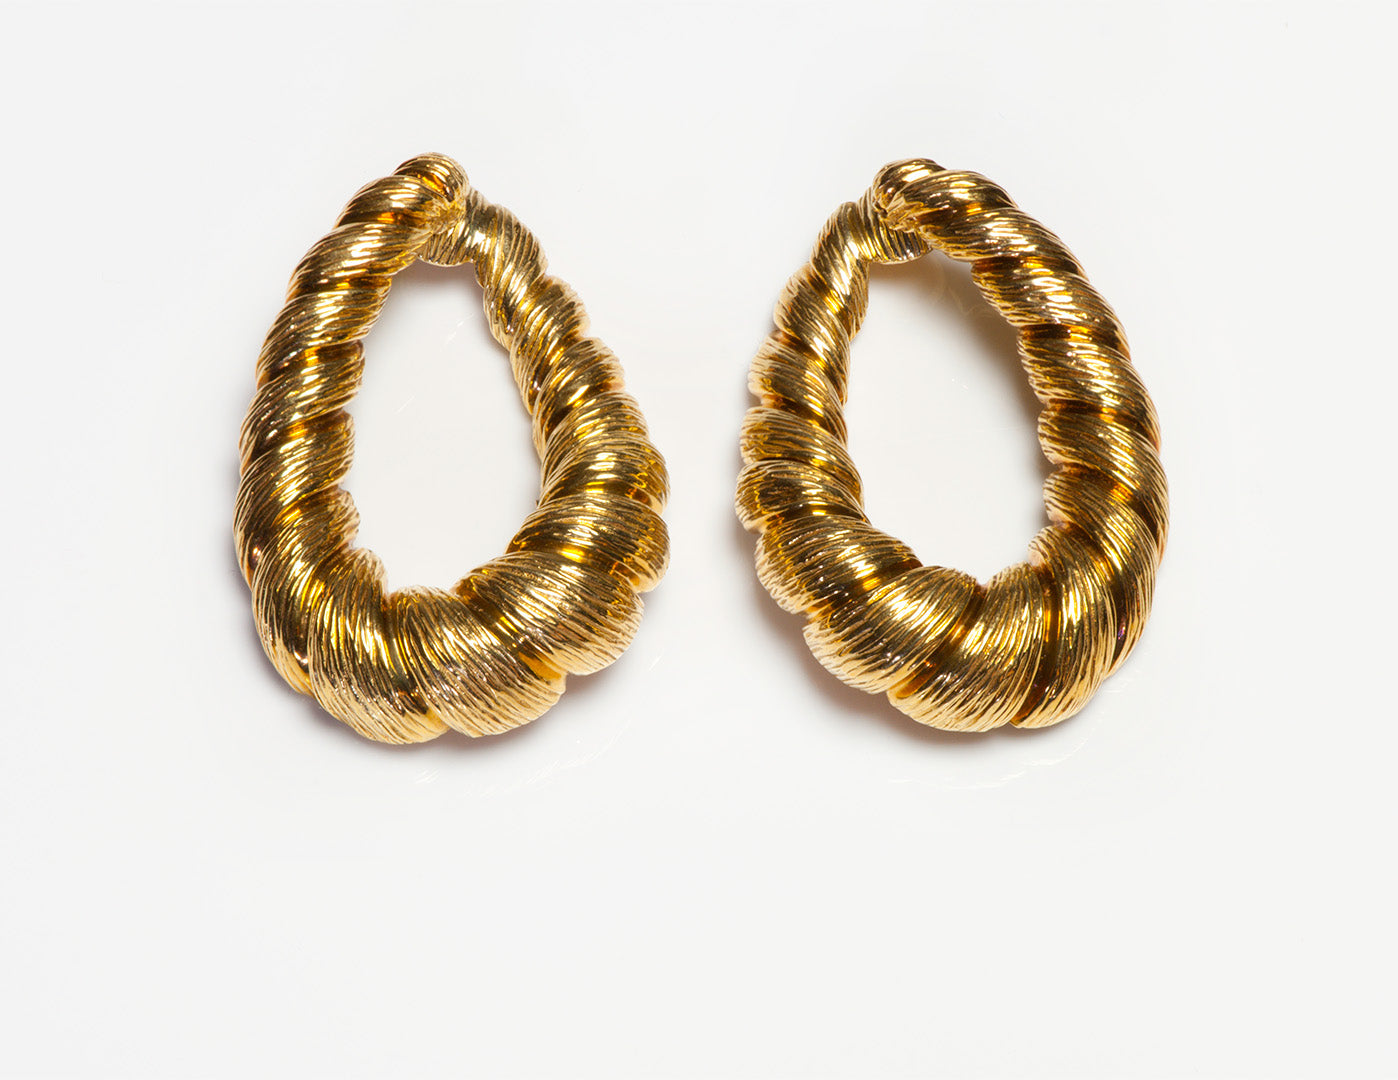 Gold Earrings: A Must-Have for Every Woman